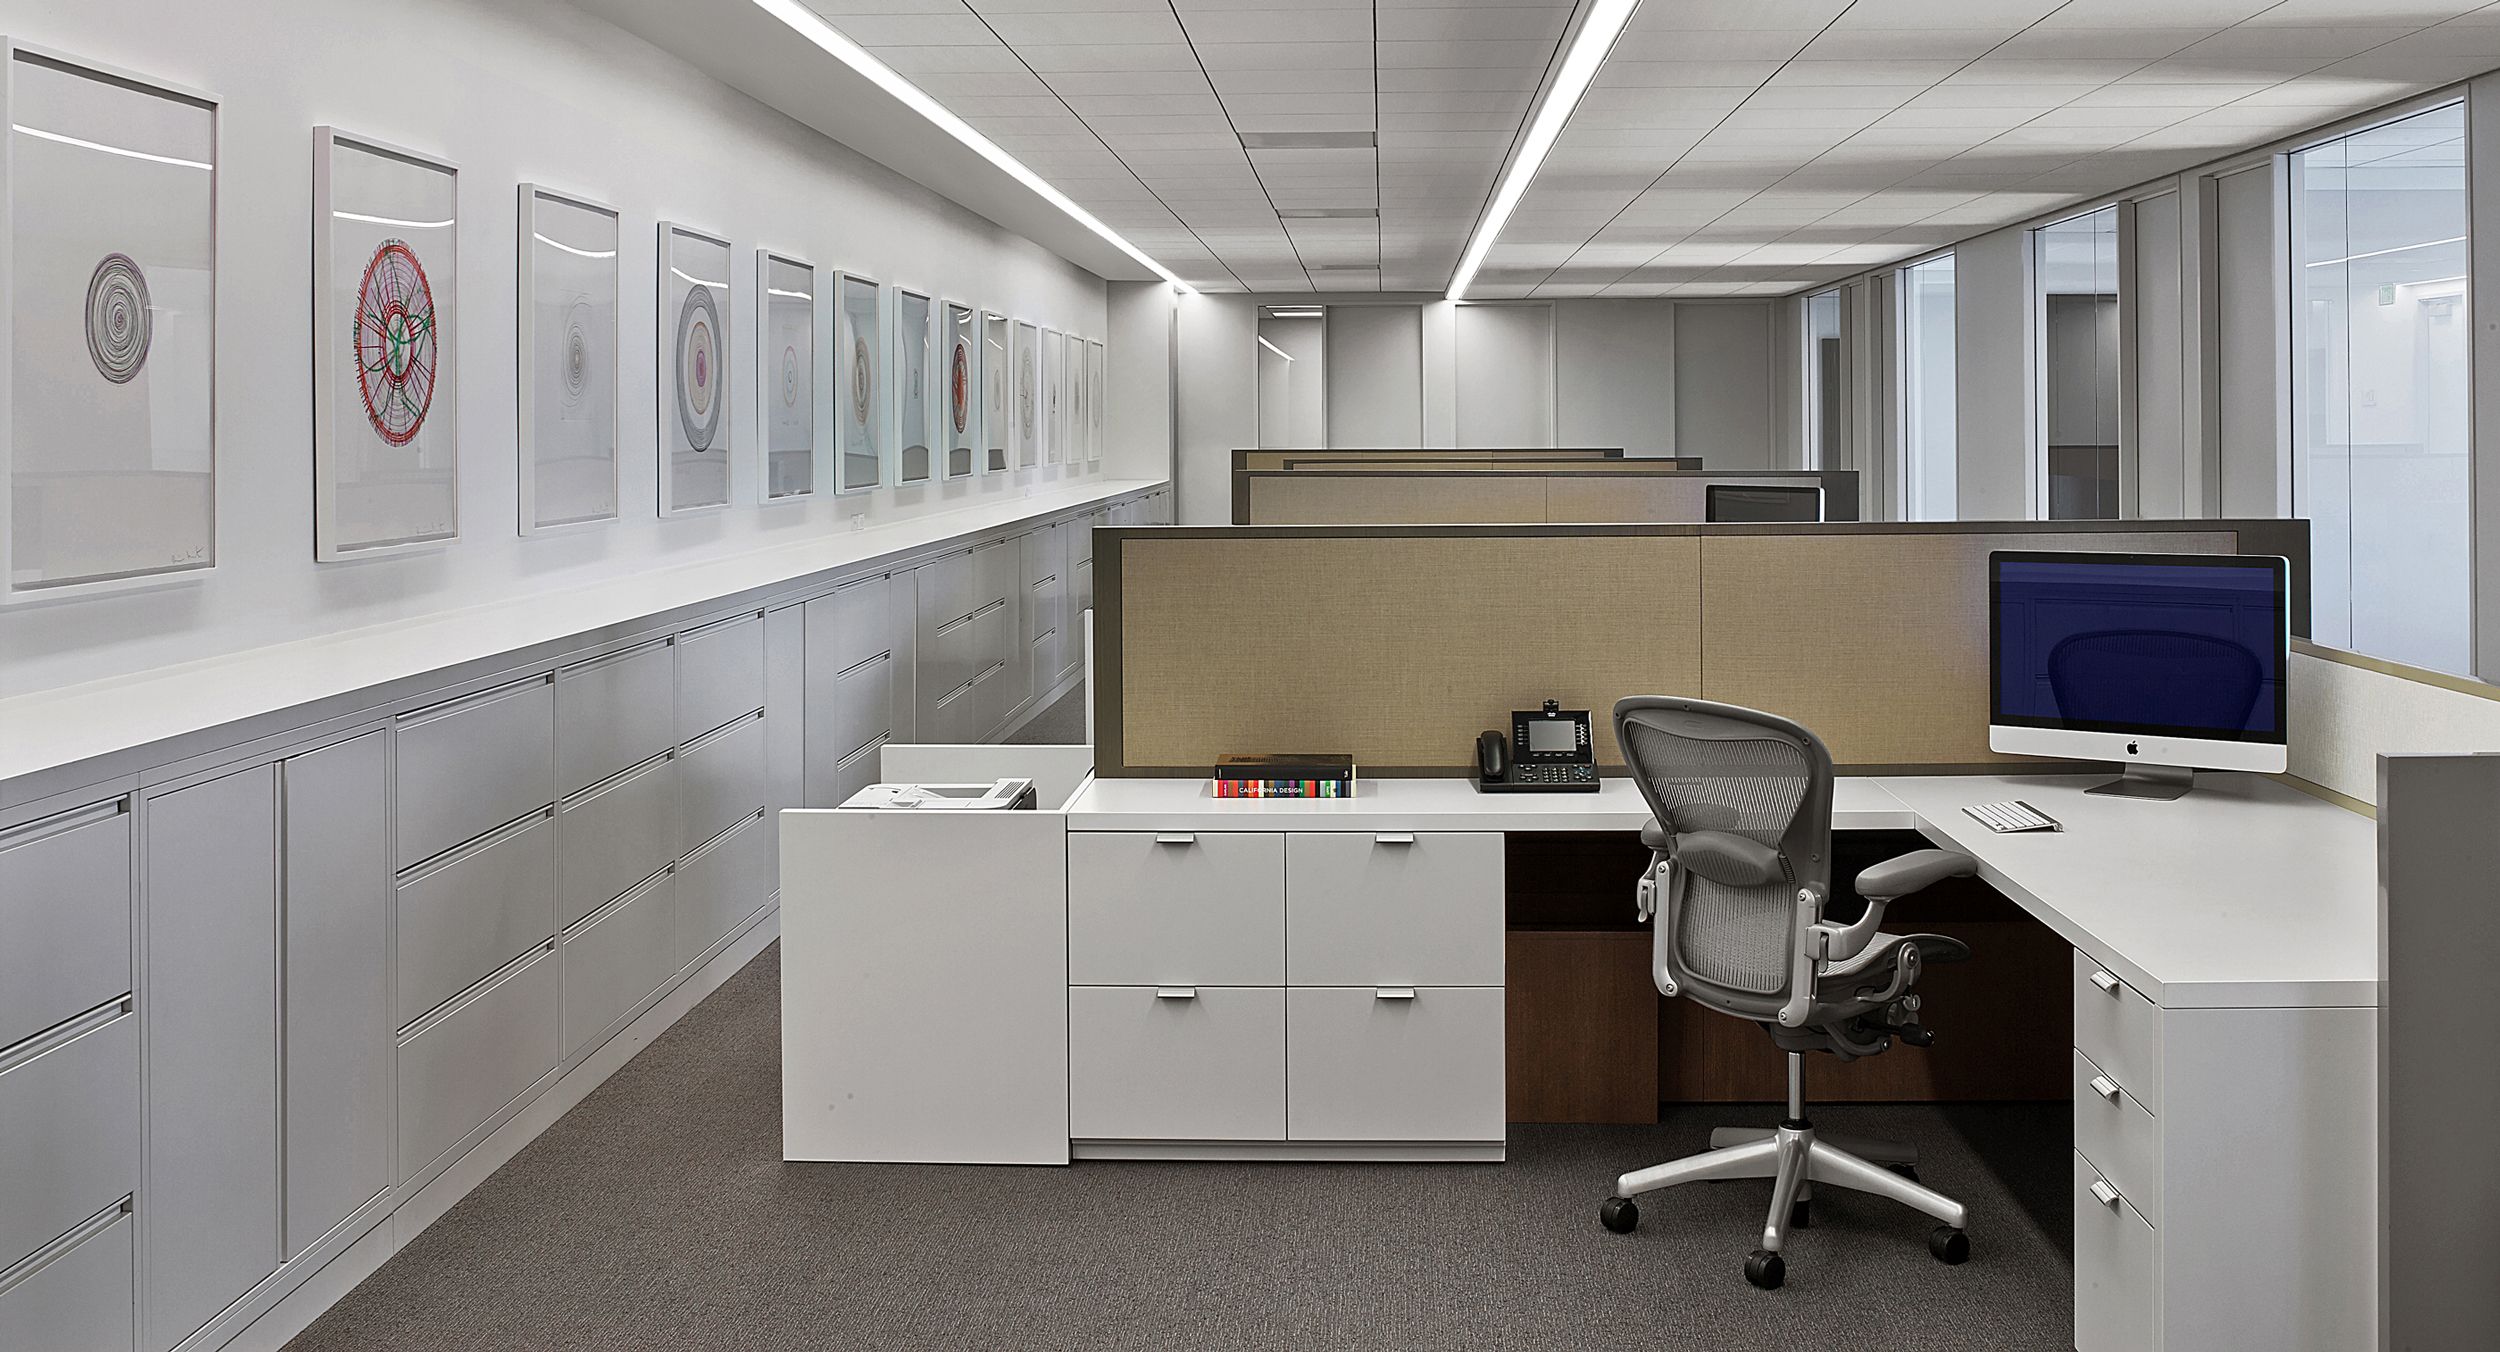 Open plan workstations feature white laminate and casework resulting in a beautiful, clean, and modern aesthetic.